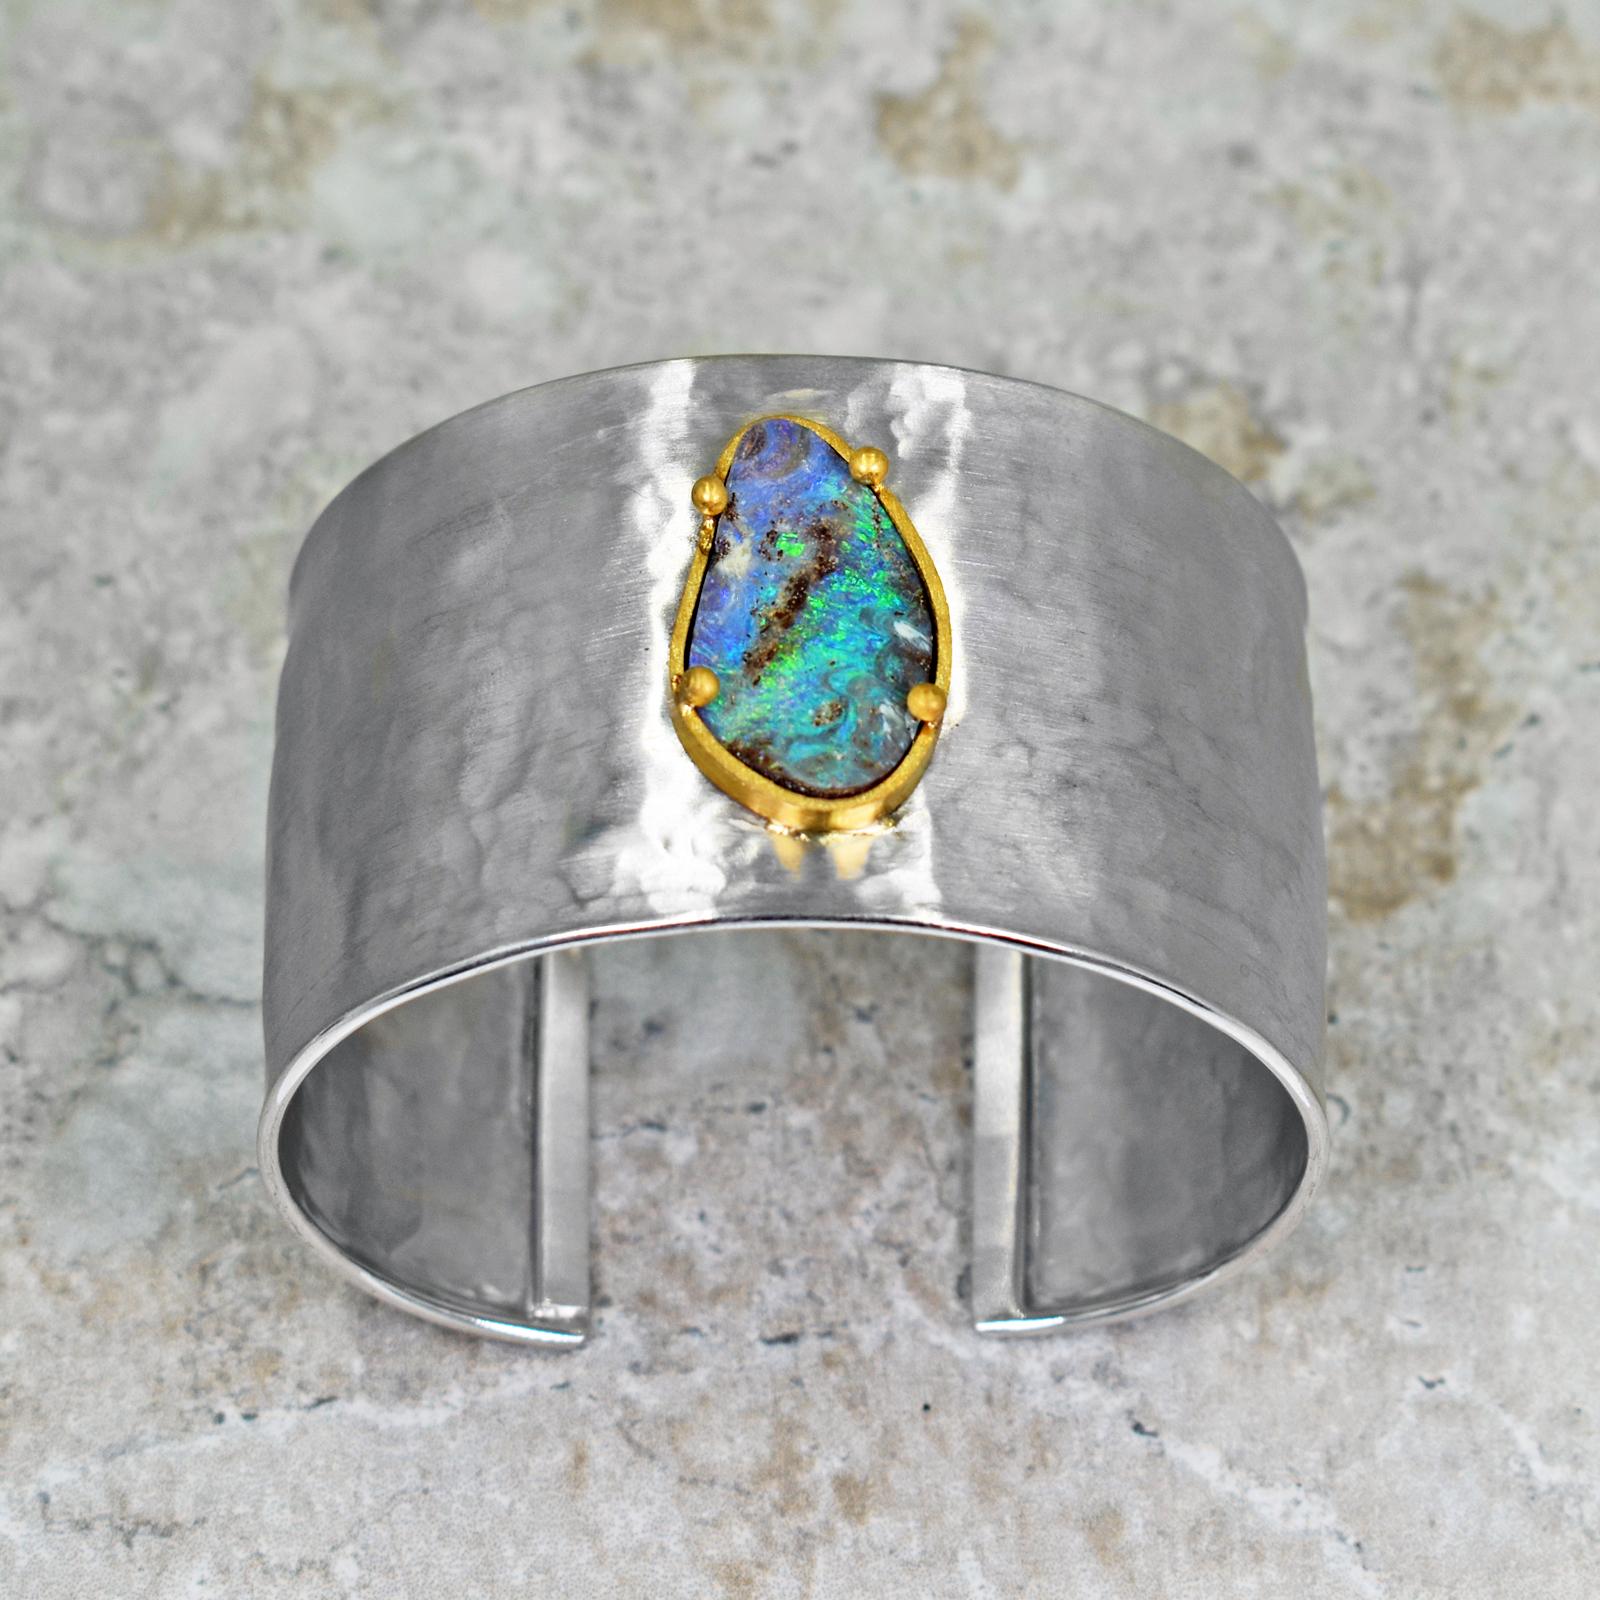 Gorgeous violet and greenish blue Australian Boulder Opal set in 22k yellow gold on a hammered, wide sterling silver cuff bracelet. Silver cuff is 1.5 inches in width. Inside of bracelet is 2.32 inches in width and bracelet opening is 0.94 inches